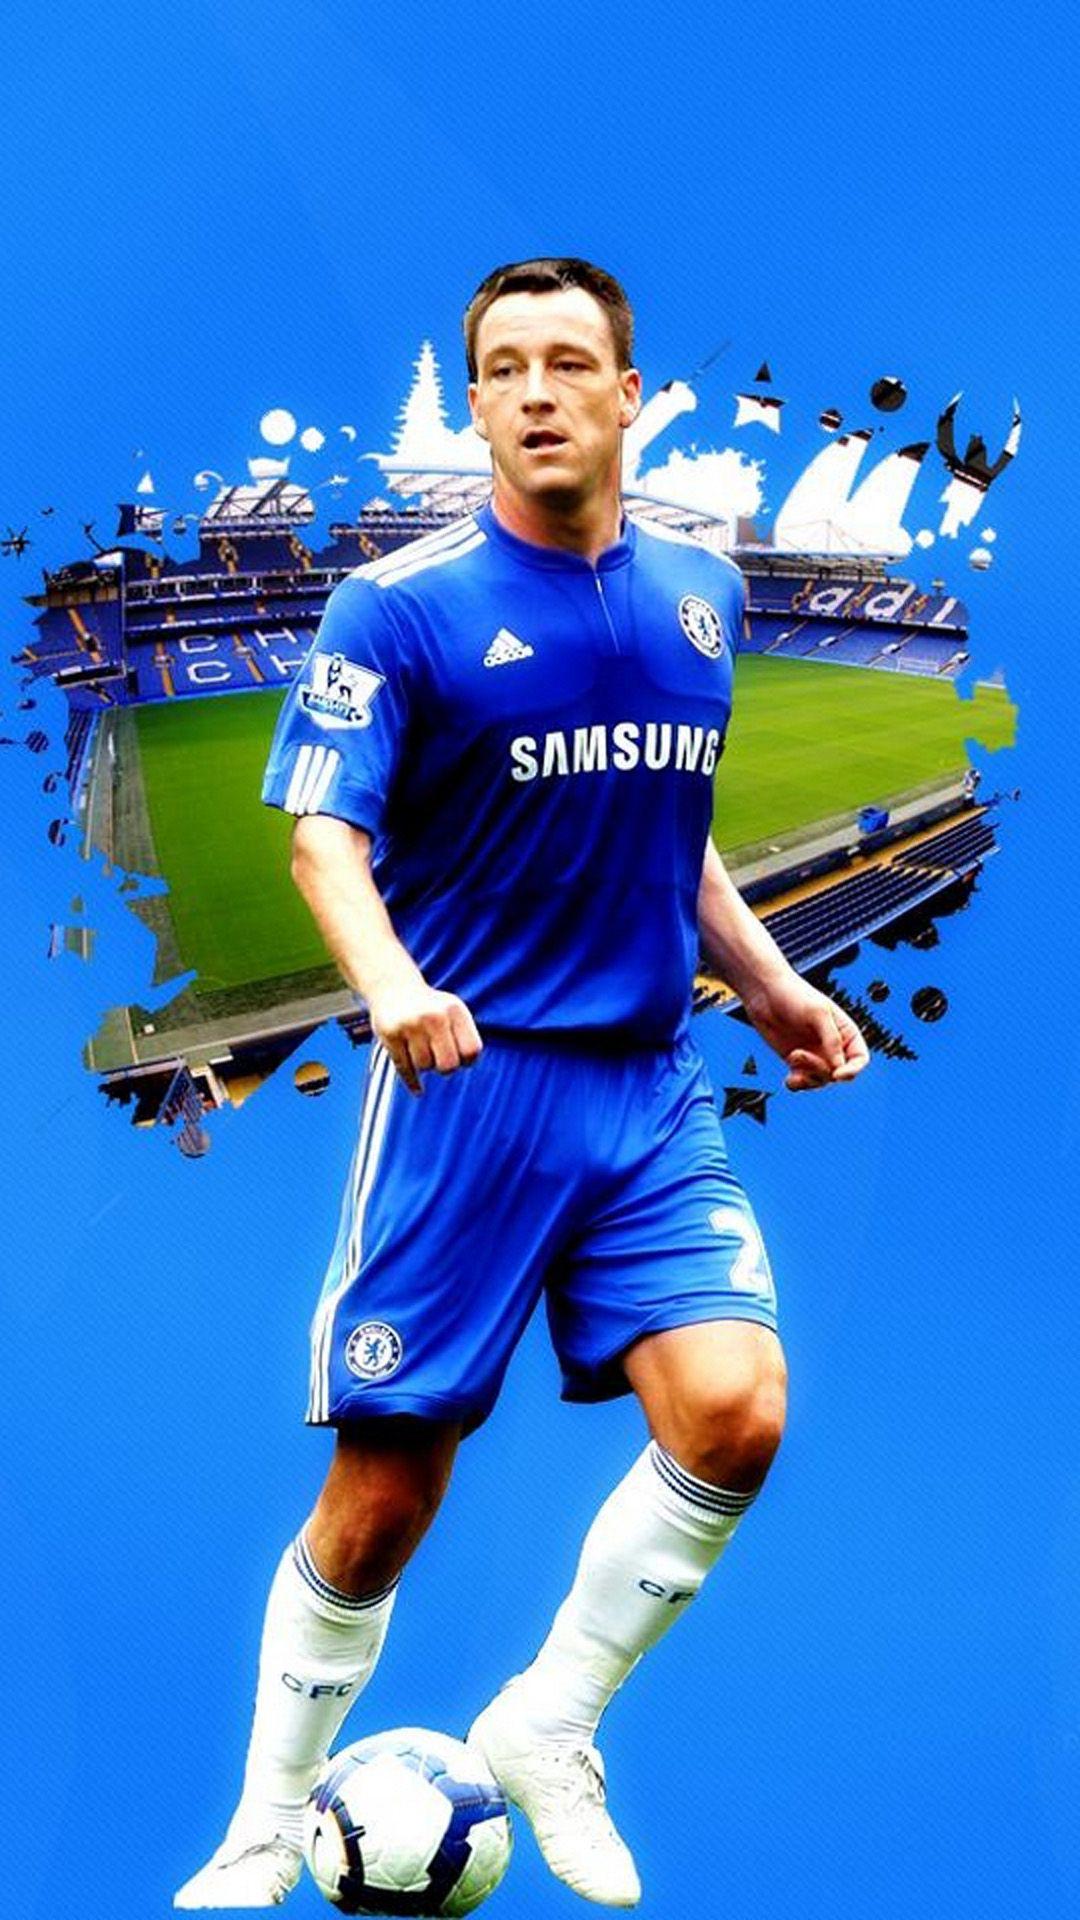 Terry Wallpaper for Samsung Galaxy S5